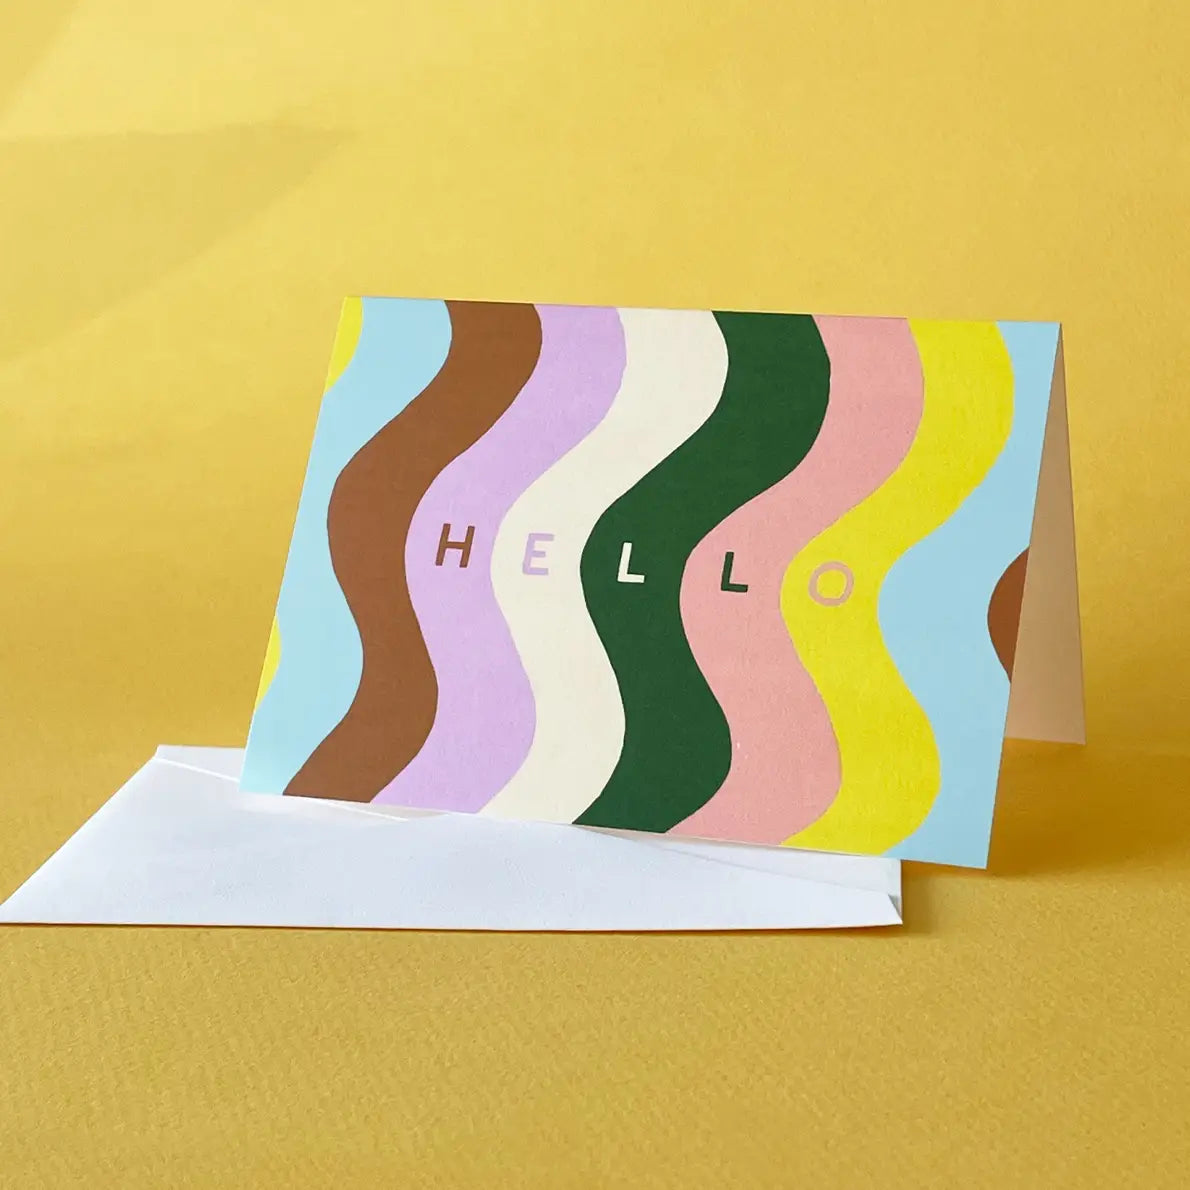 White card with blue, brown, lavender, white, green, coral, and yellow swirls. Text reads "hello"